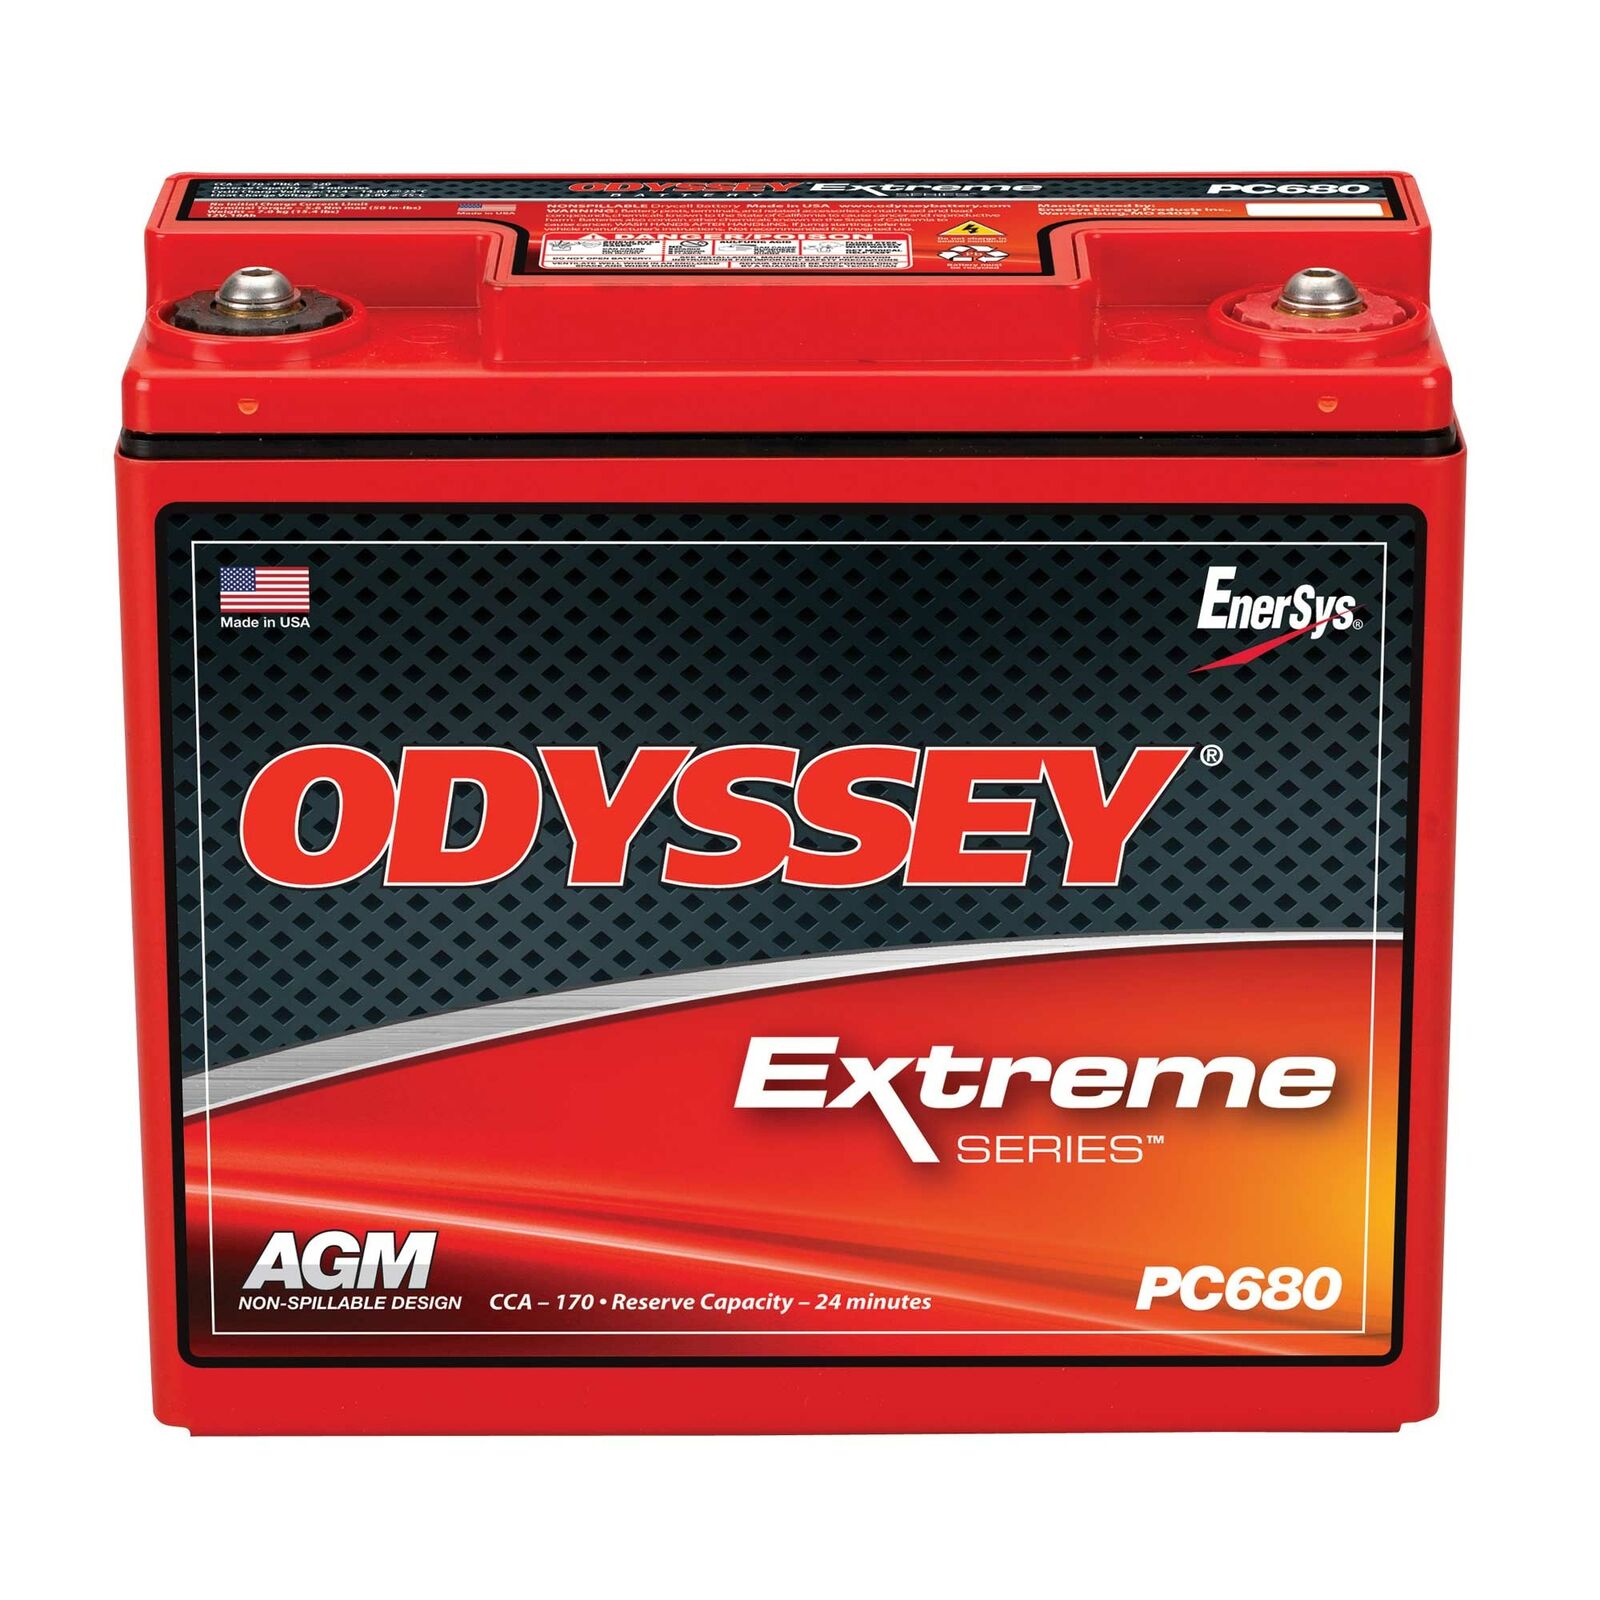 Odyssey Extreme Racing 25 / PC680 Battery - Race/Oval/Rally/Motorsport/Dry Cell